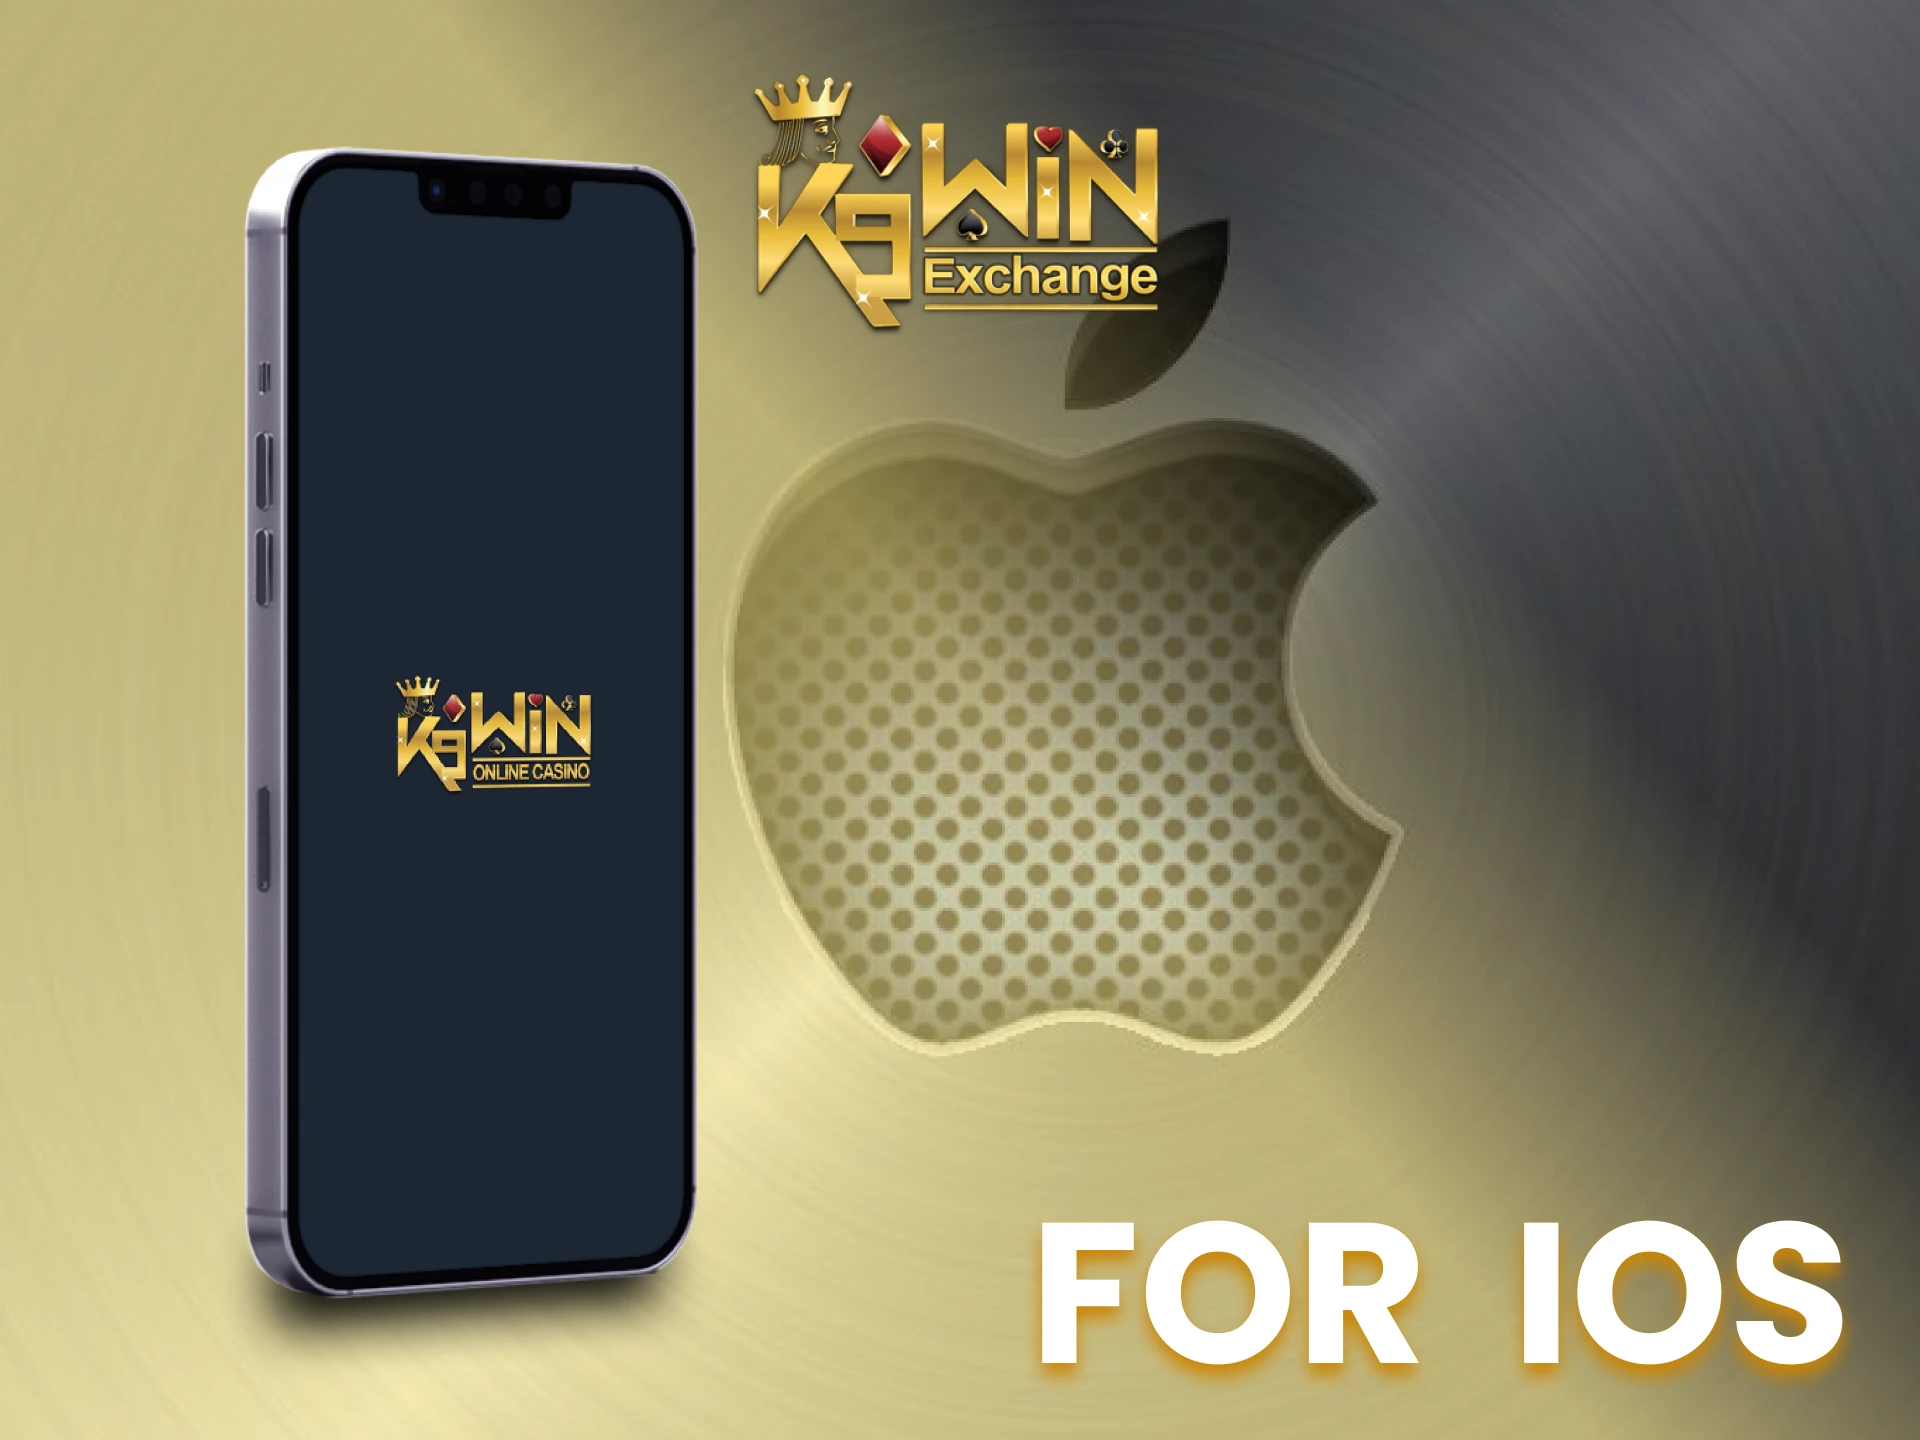 Use the K9Win app on your iOS device.